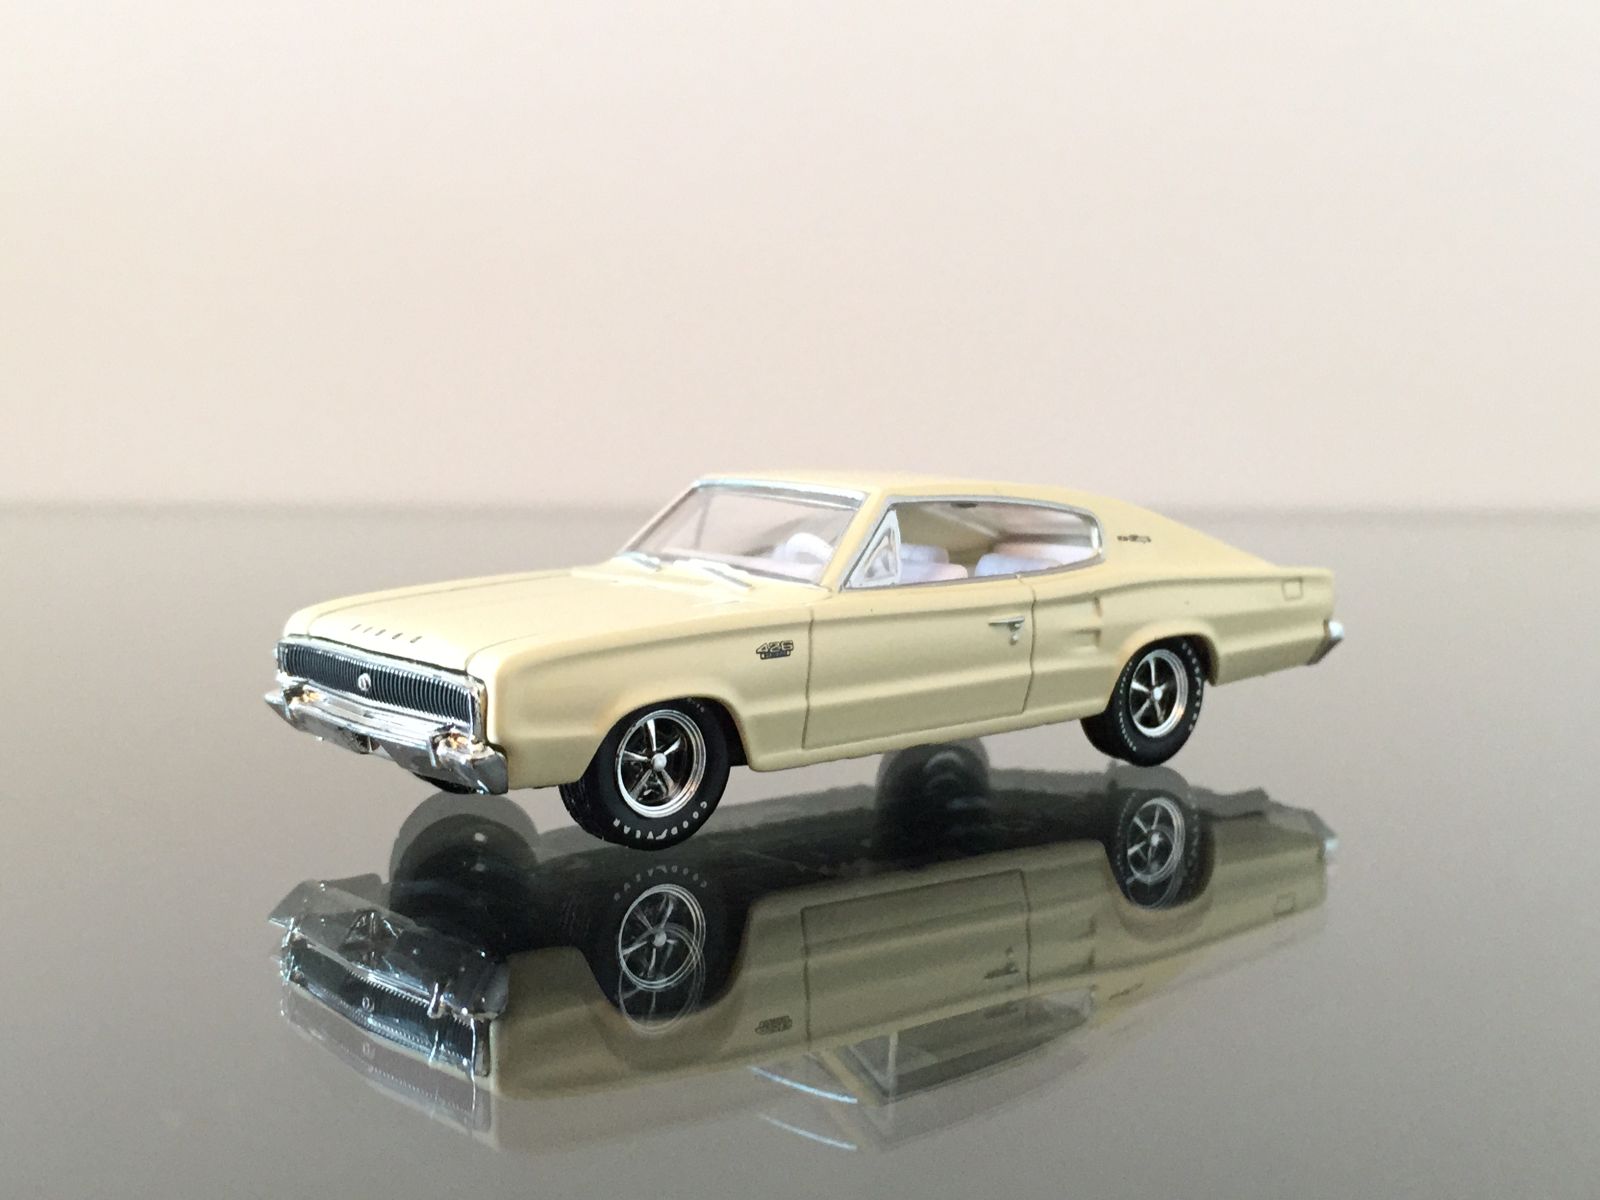 Illustration for article titled Video Review: M2 Machines 1:64 Scale 66 Dodge Charger Hemi